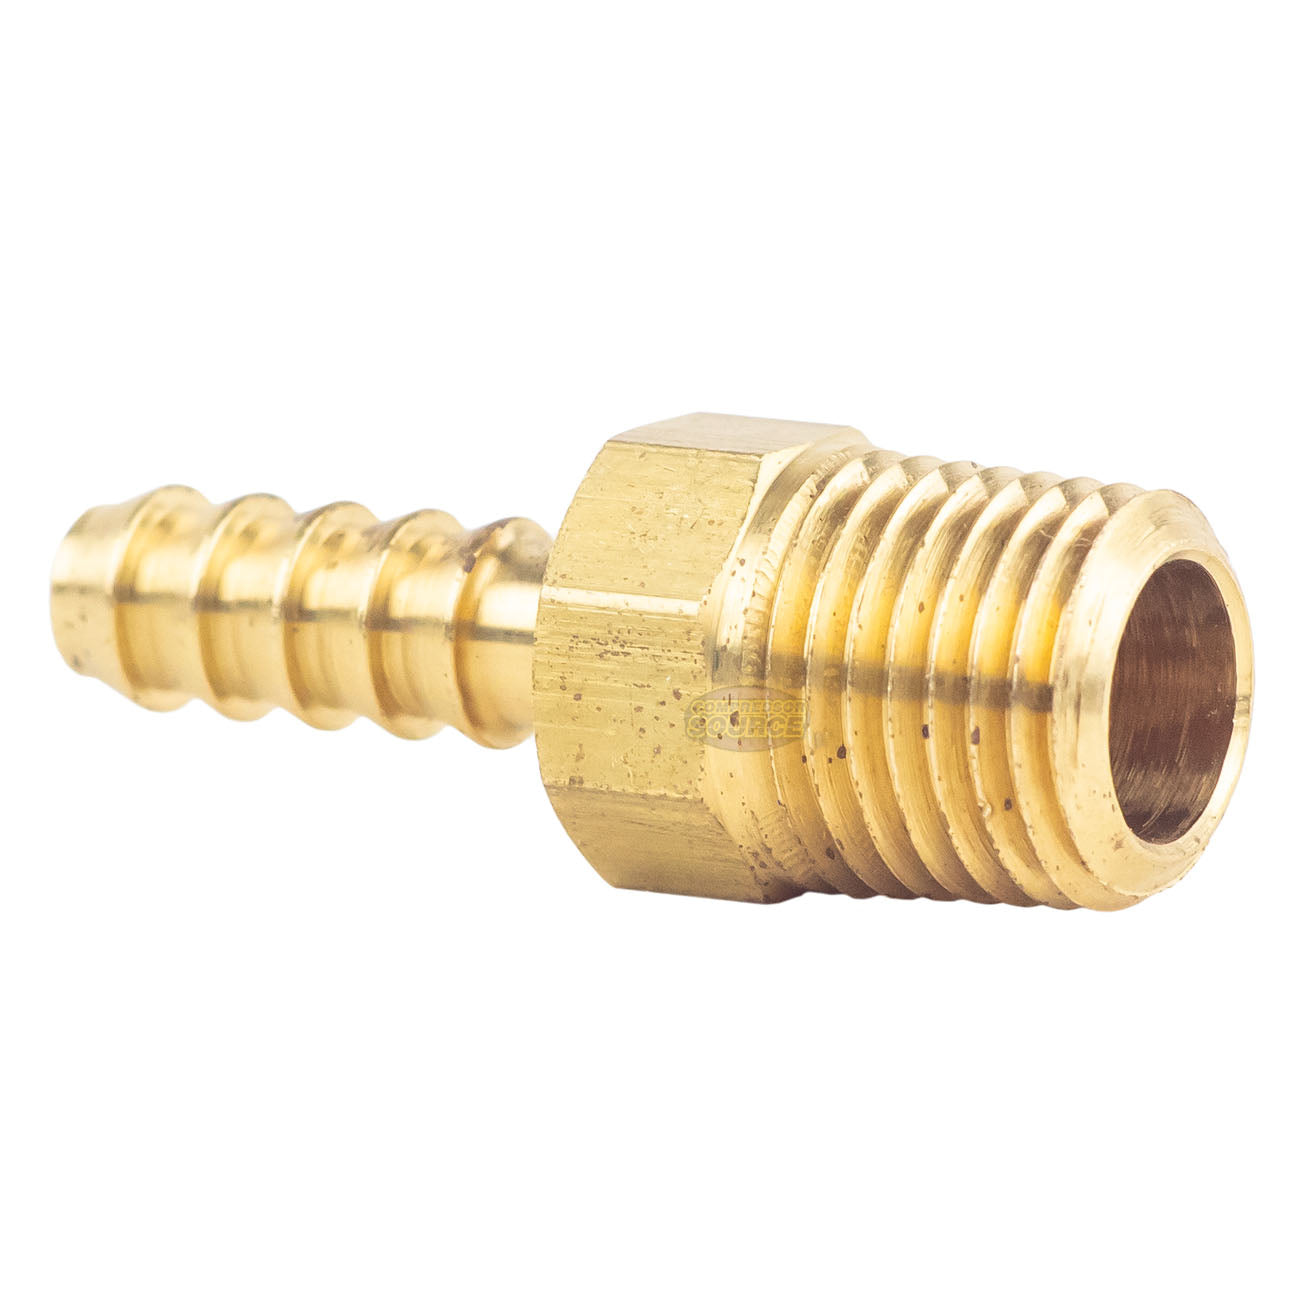 Brass Hose Barbs 1/4" Male NPT for 1/4" ID Hoses Barbed Fitting Air Fuel 2 Pack